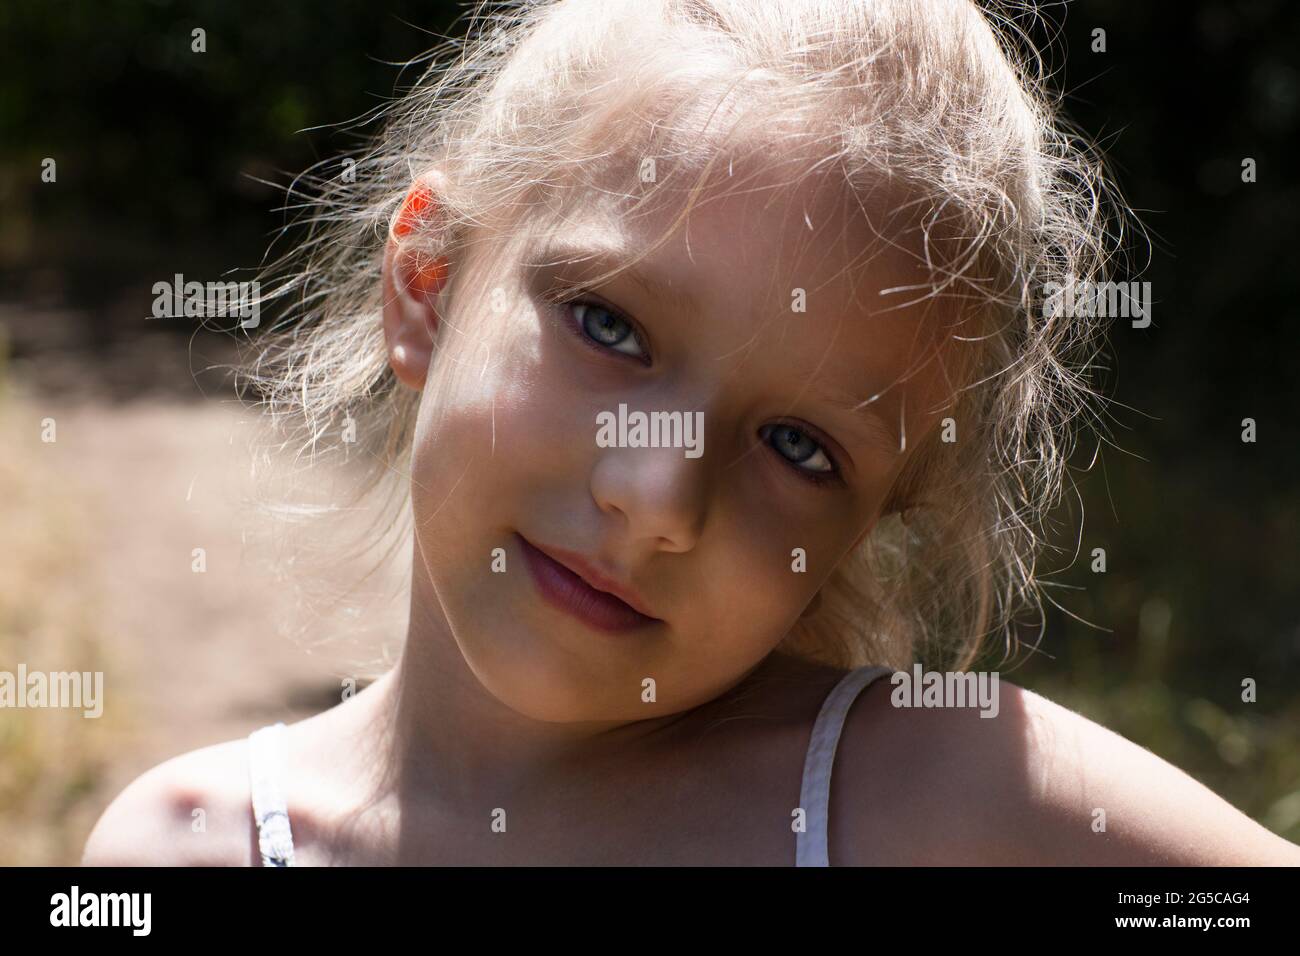 Caucasian blond girl with a cute smile looks sad. Close-up portrait Stock Photo